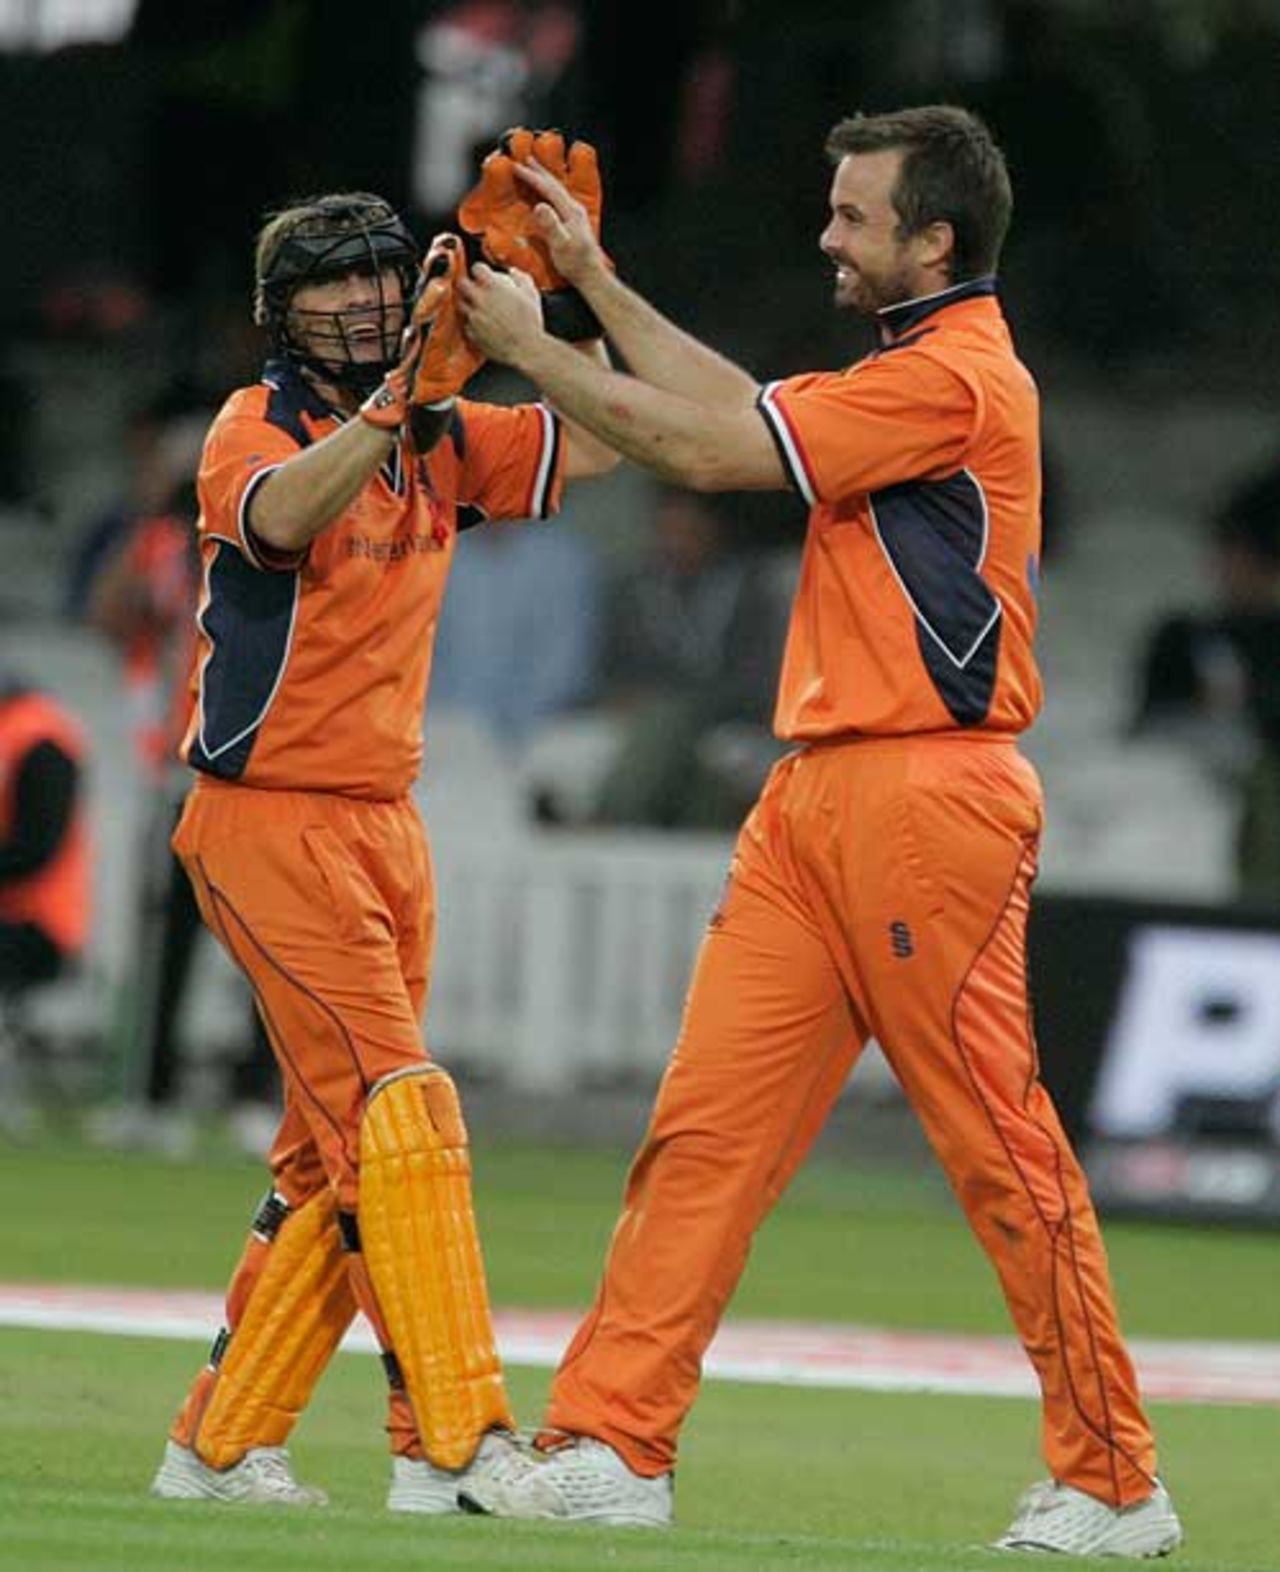 Jeroen Smits and Bas Zuiderent celebrate a wicket, England v Netherlands, ICC World Twenty20, Lord's, June 5, 2009